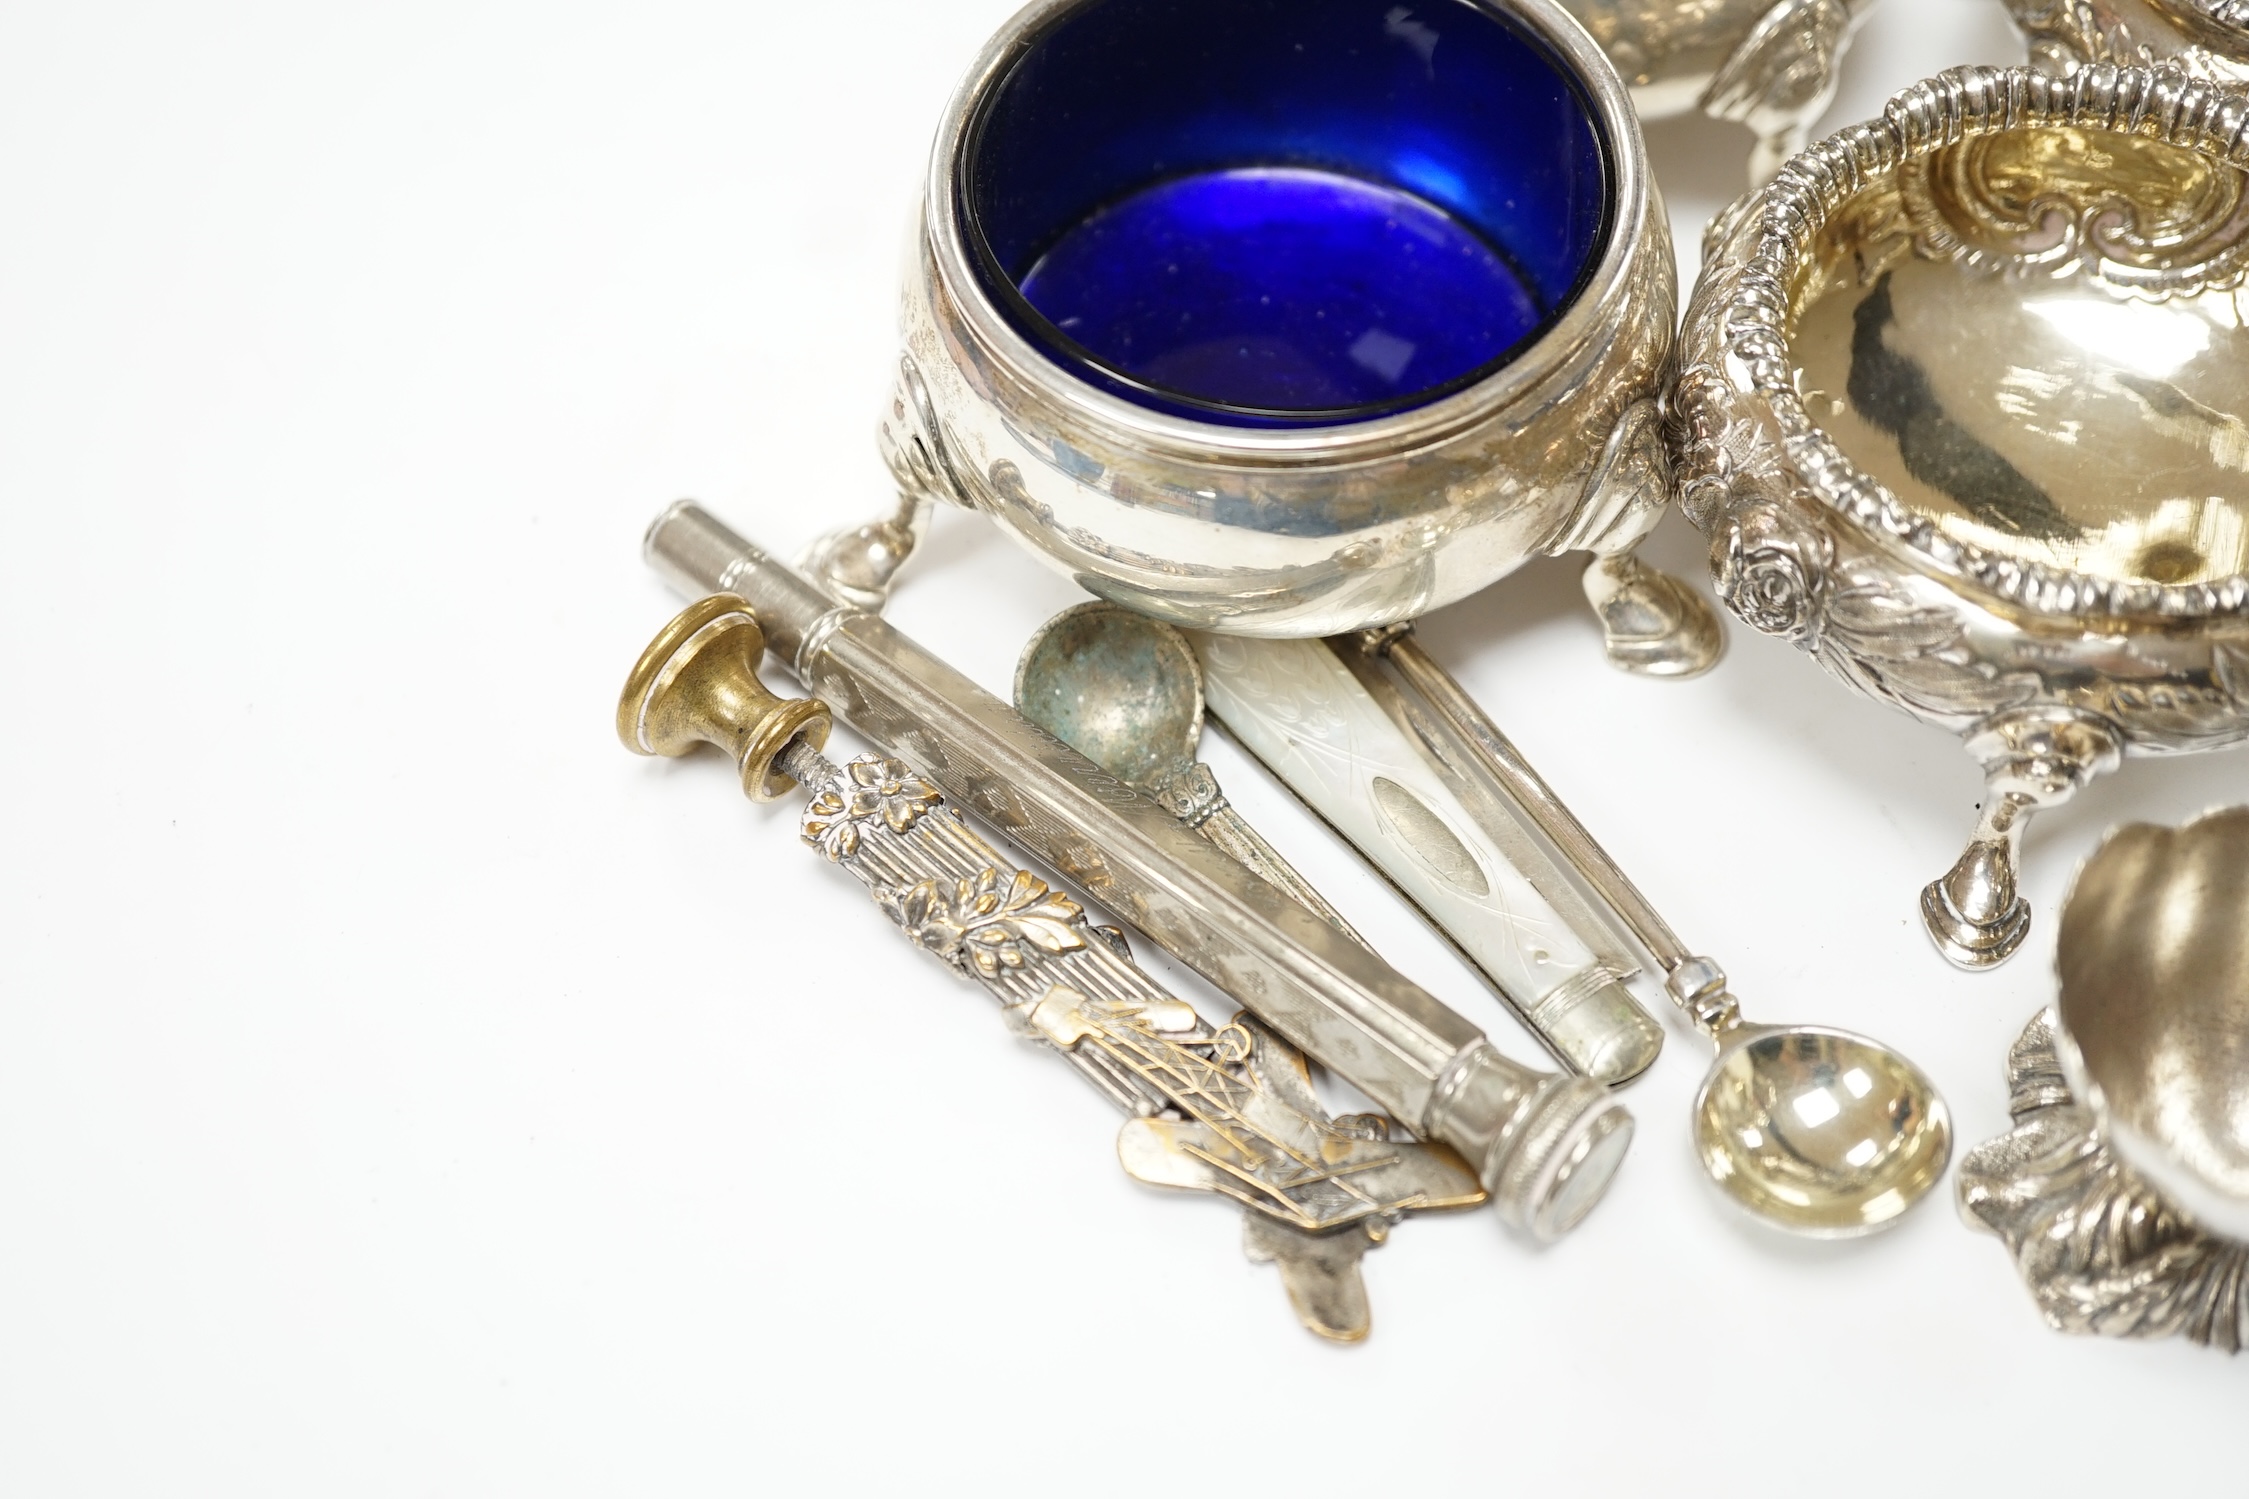 A pair of George II silver bun salts, London, 1735, diameter 60mm, a later pair of Victorian silver salts, a pair of Edwardian silver pepperettes by William Comyns and sundry other items including a circular silver vesta